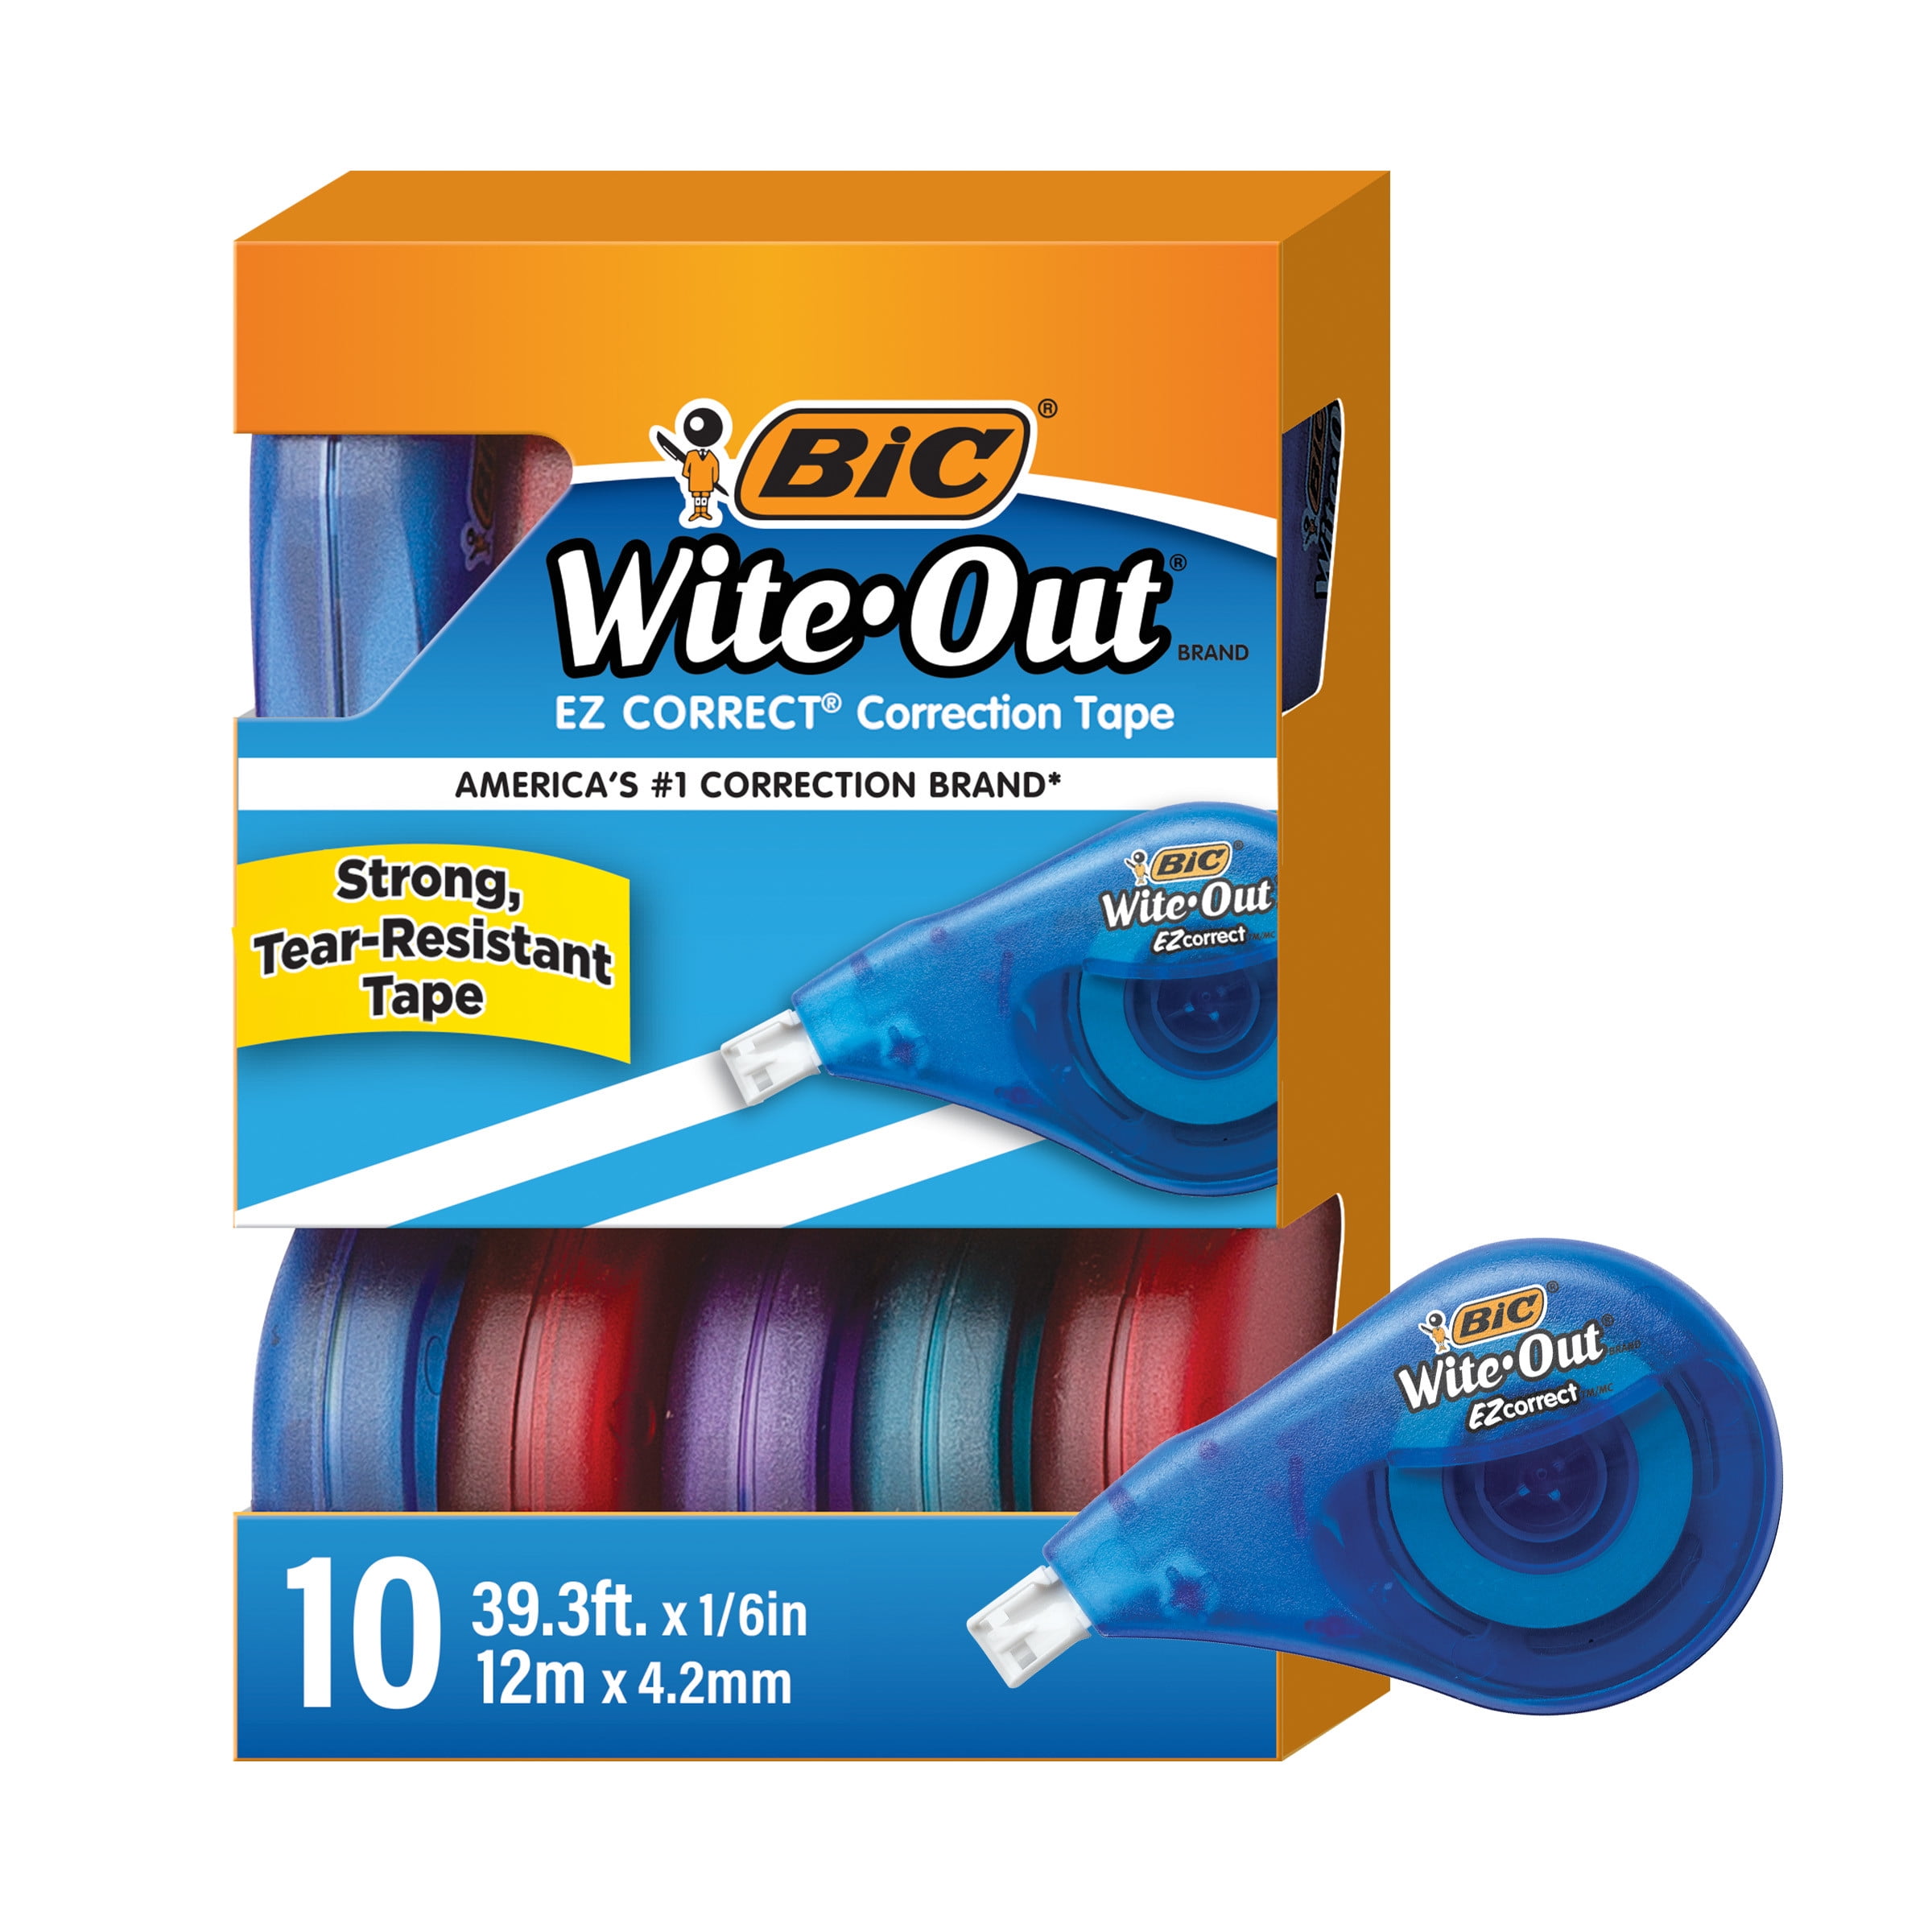 BIC Wite-Out Brand EZ Correct Correction Tape, Pack of 10, 39.37 feet